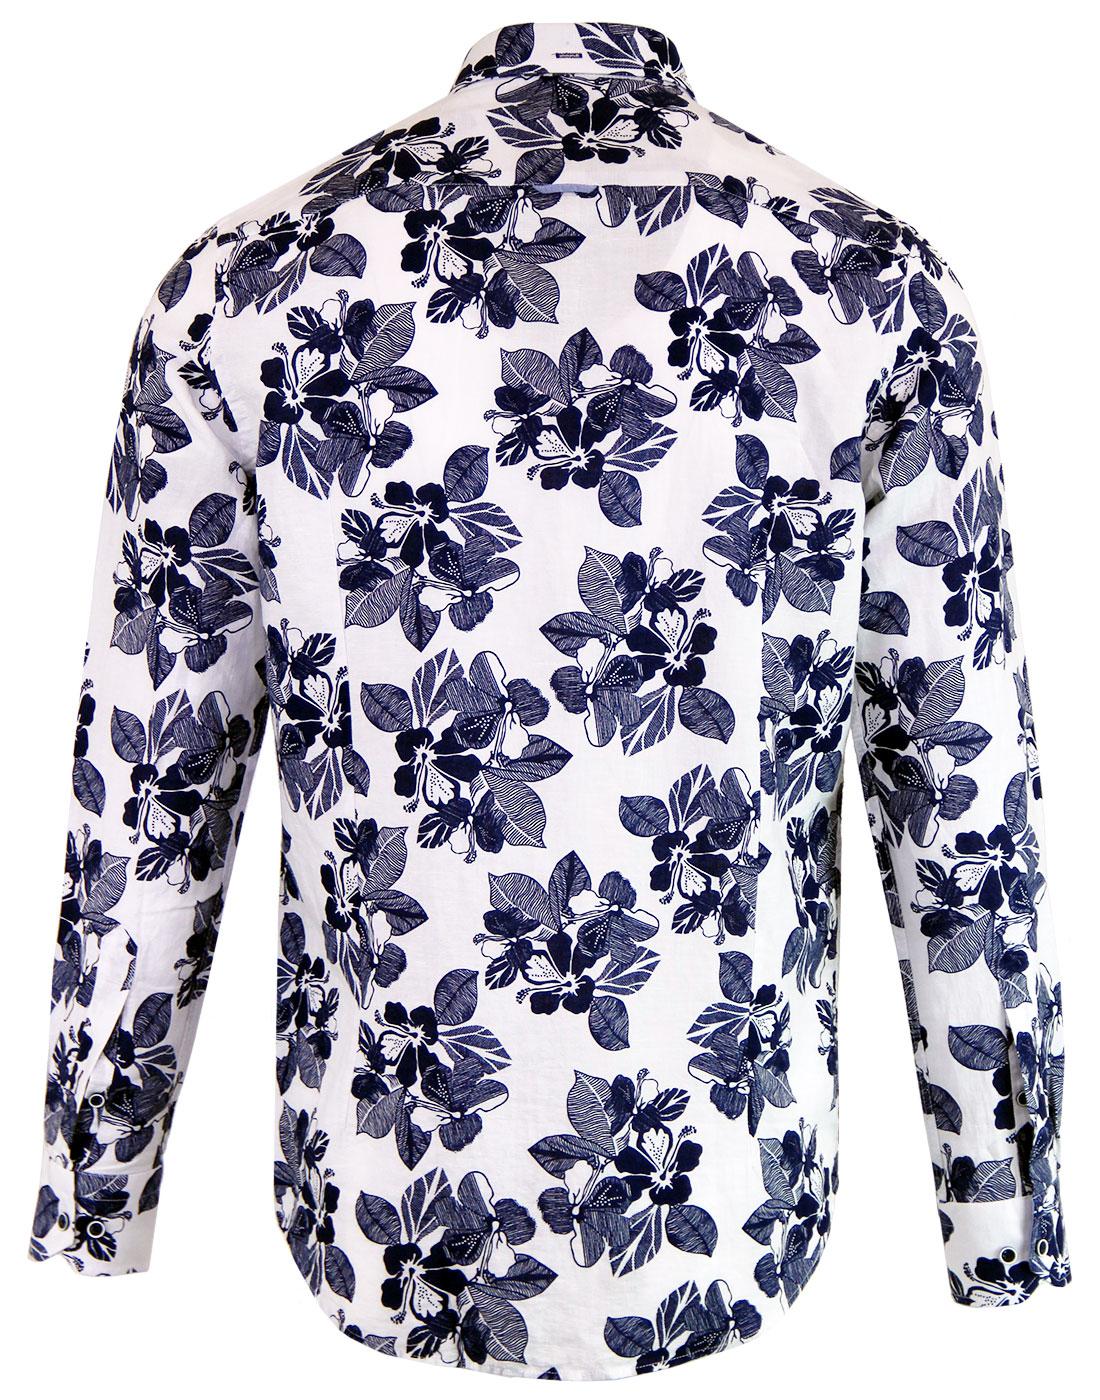 GUIDE LONDON Retro 60s Floral Linen Shirt in White/Navy